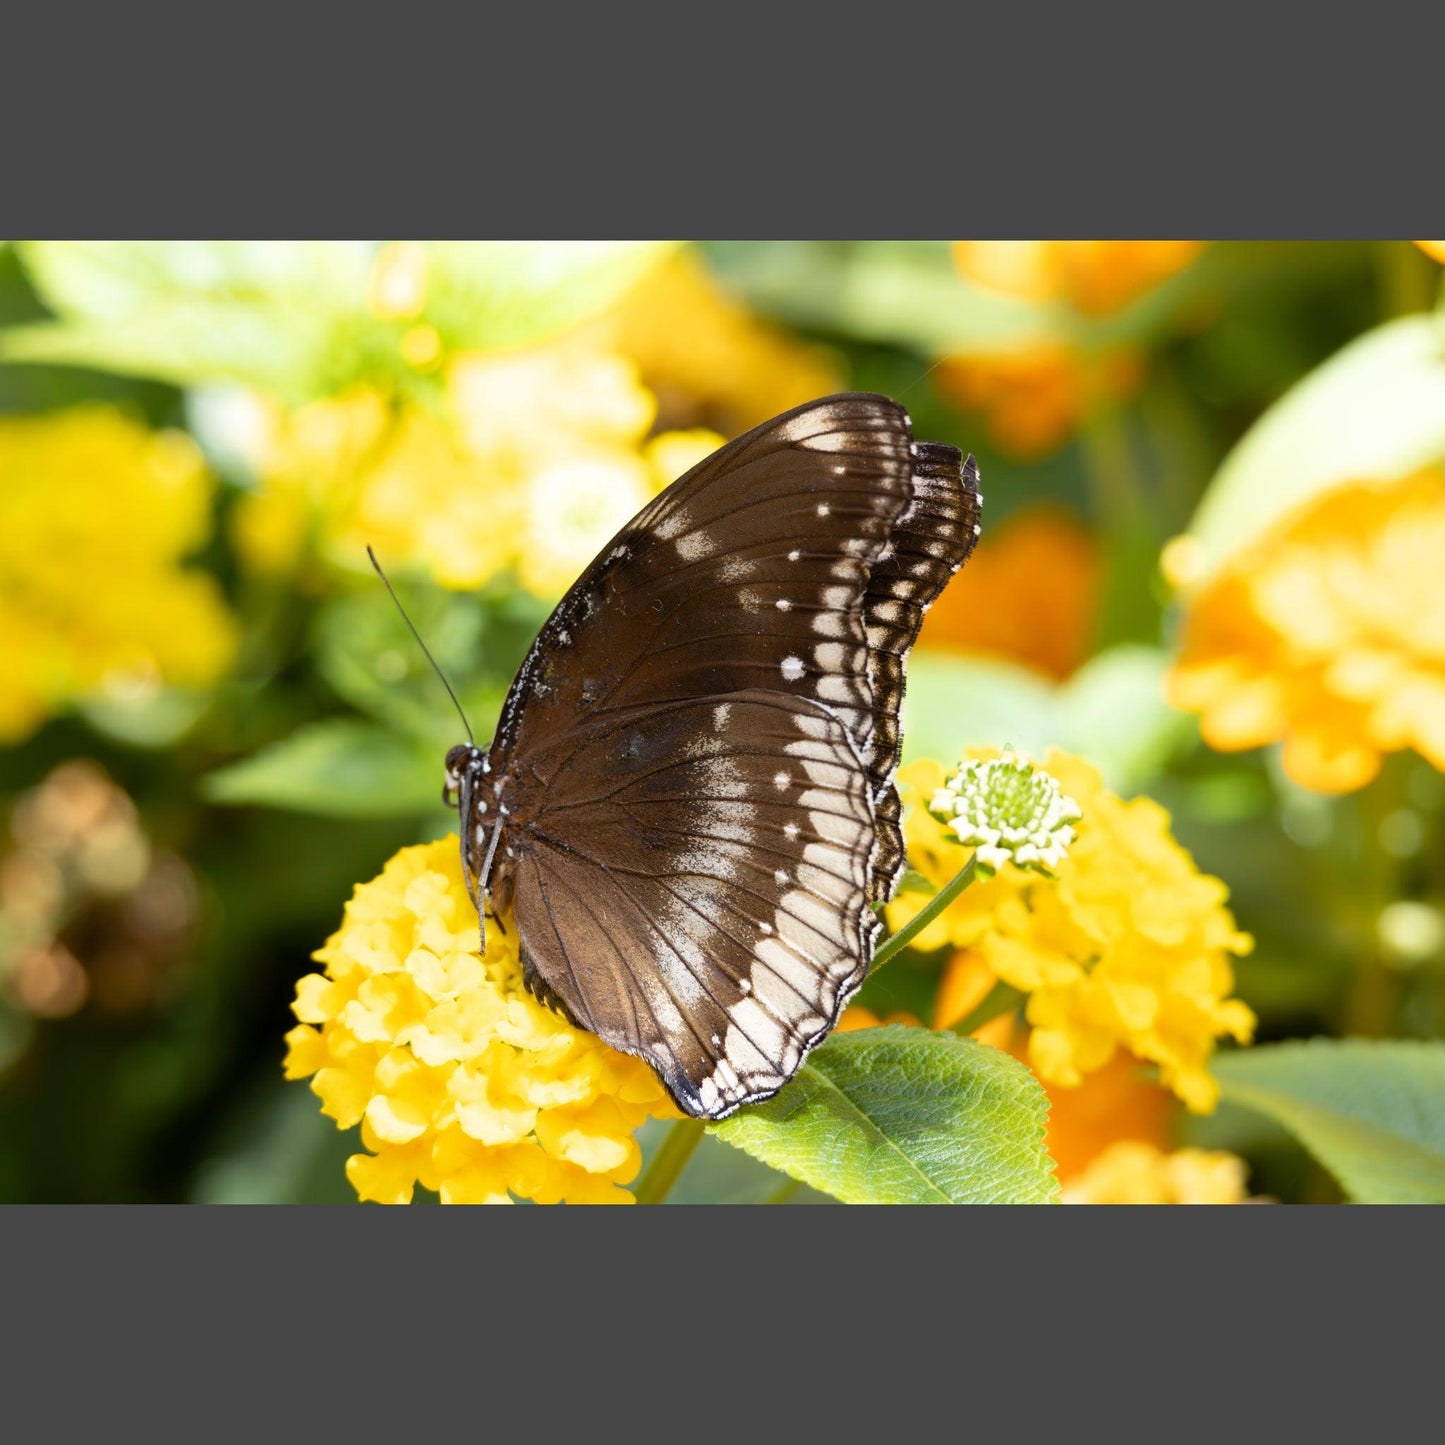 Female Great Eggfly Butterfly on yellow flowers